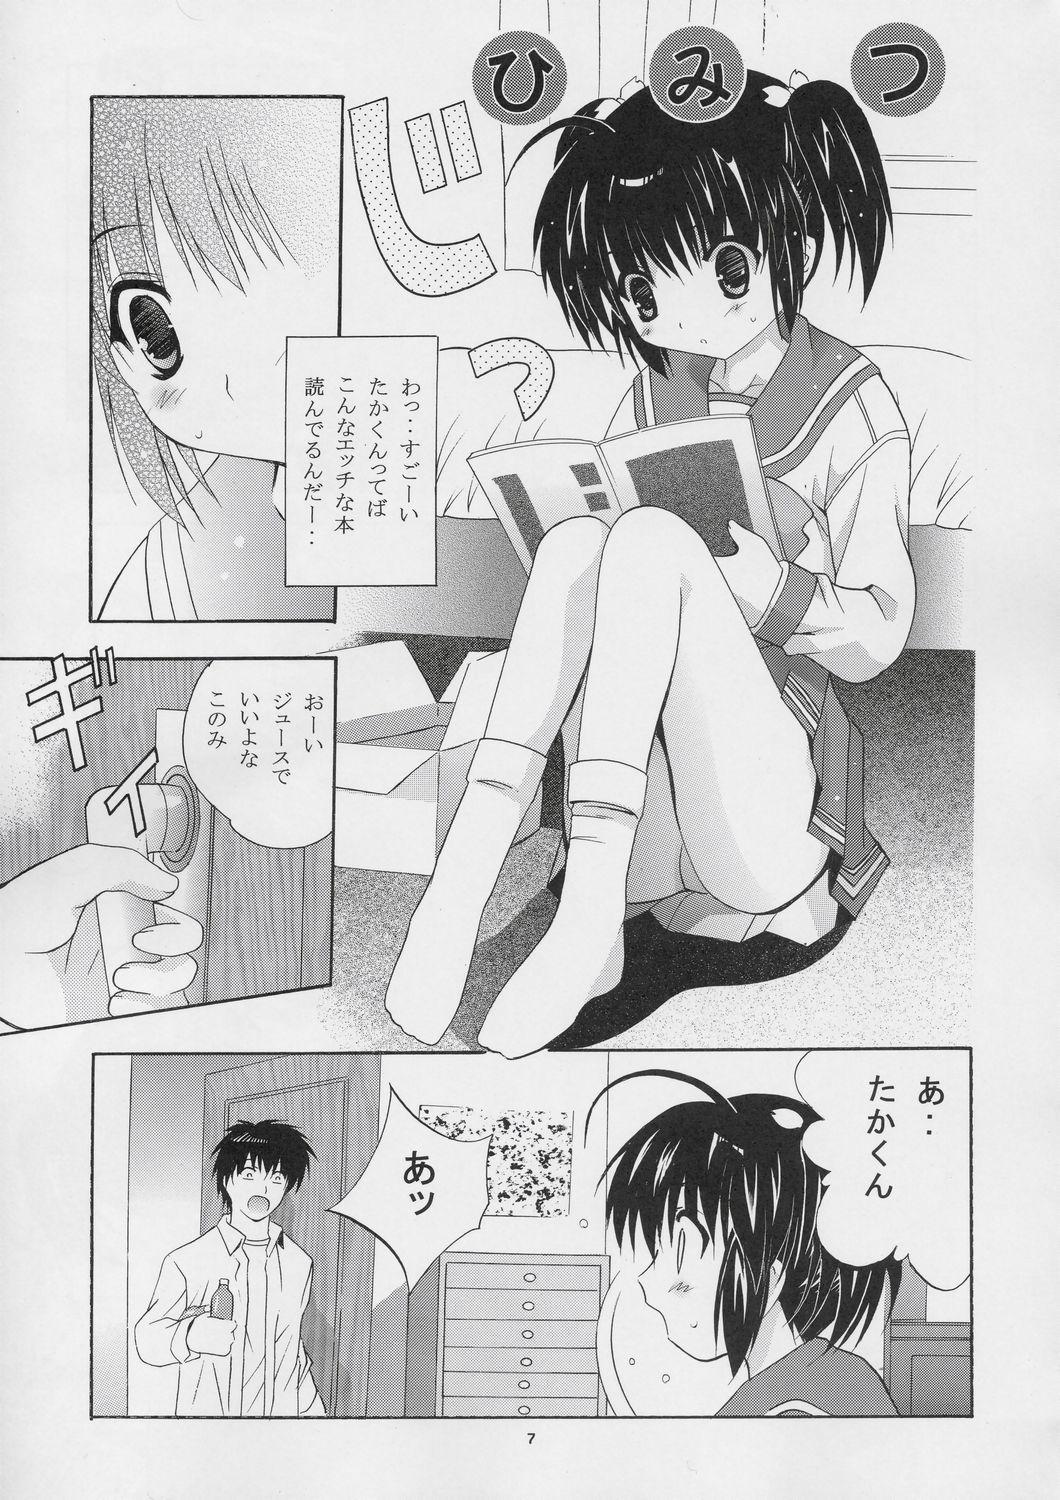 Interacial MOUSOU THEATER 16 - Toheart2 Punk - Page 6